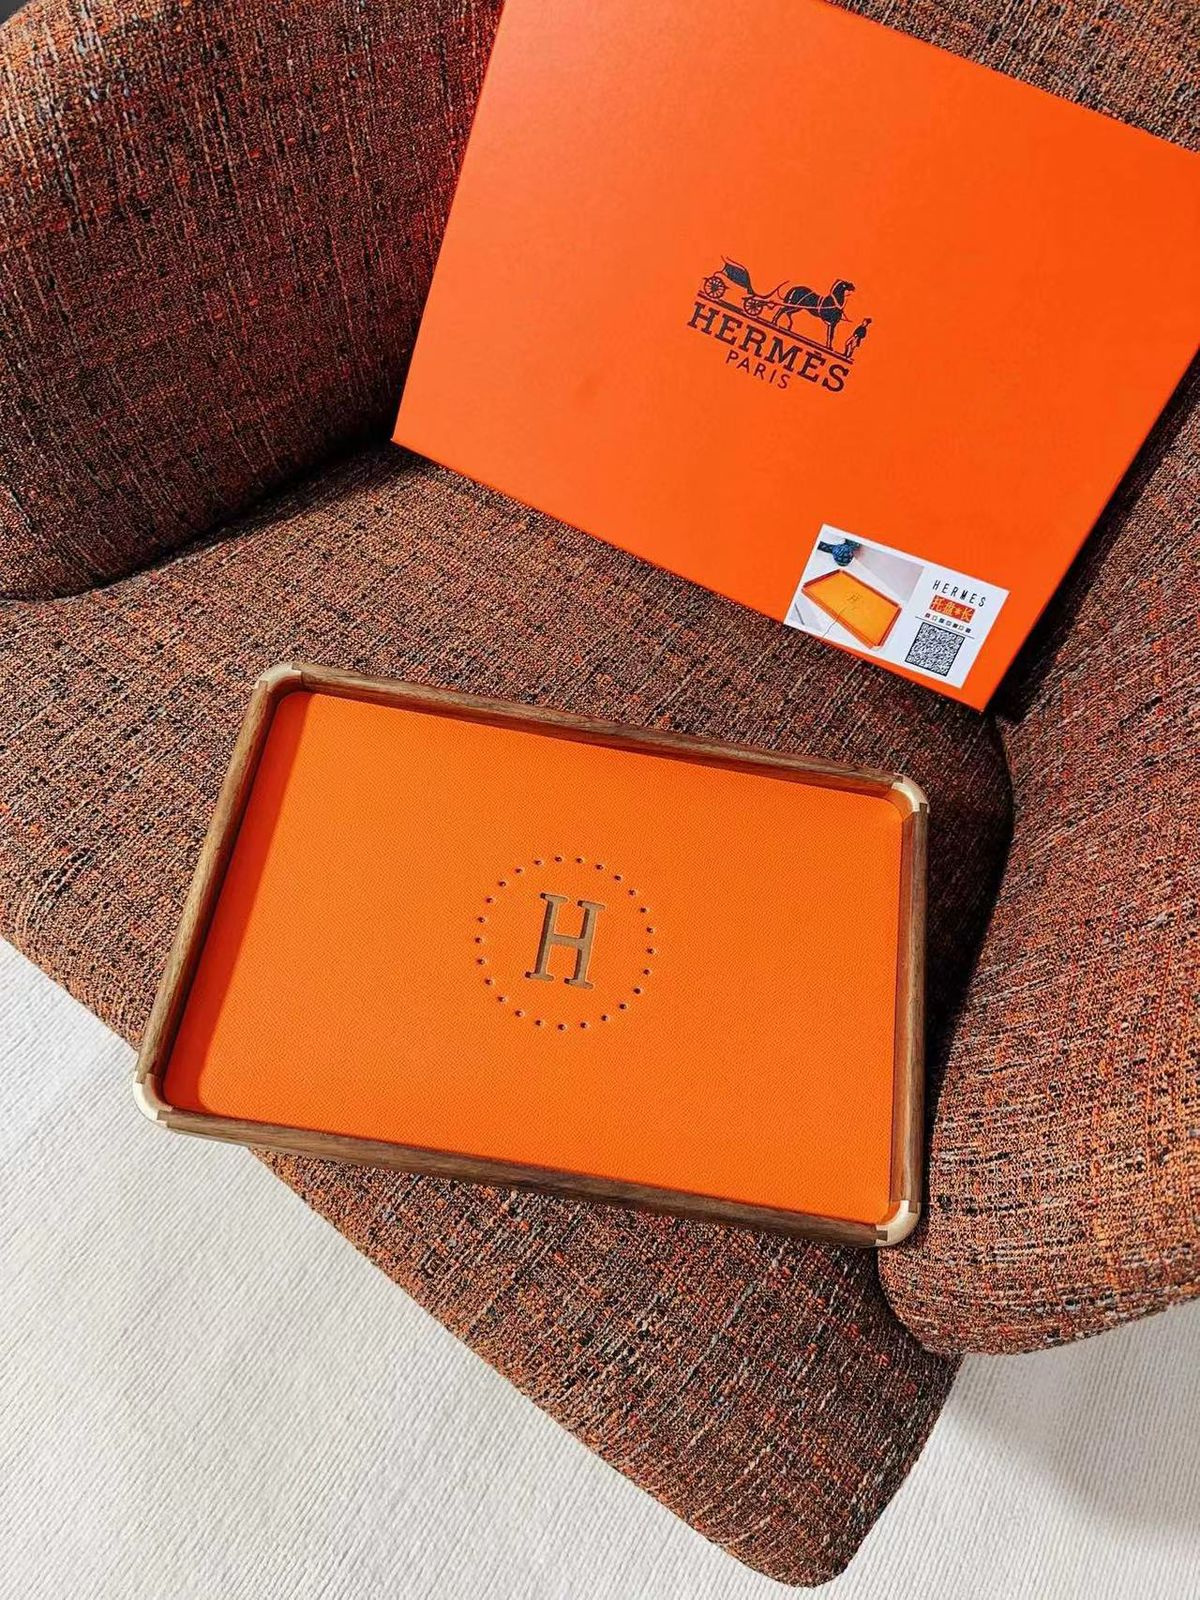 Hermes small rectangle tray